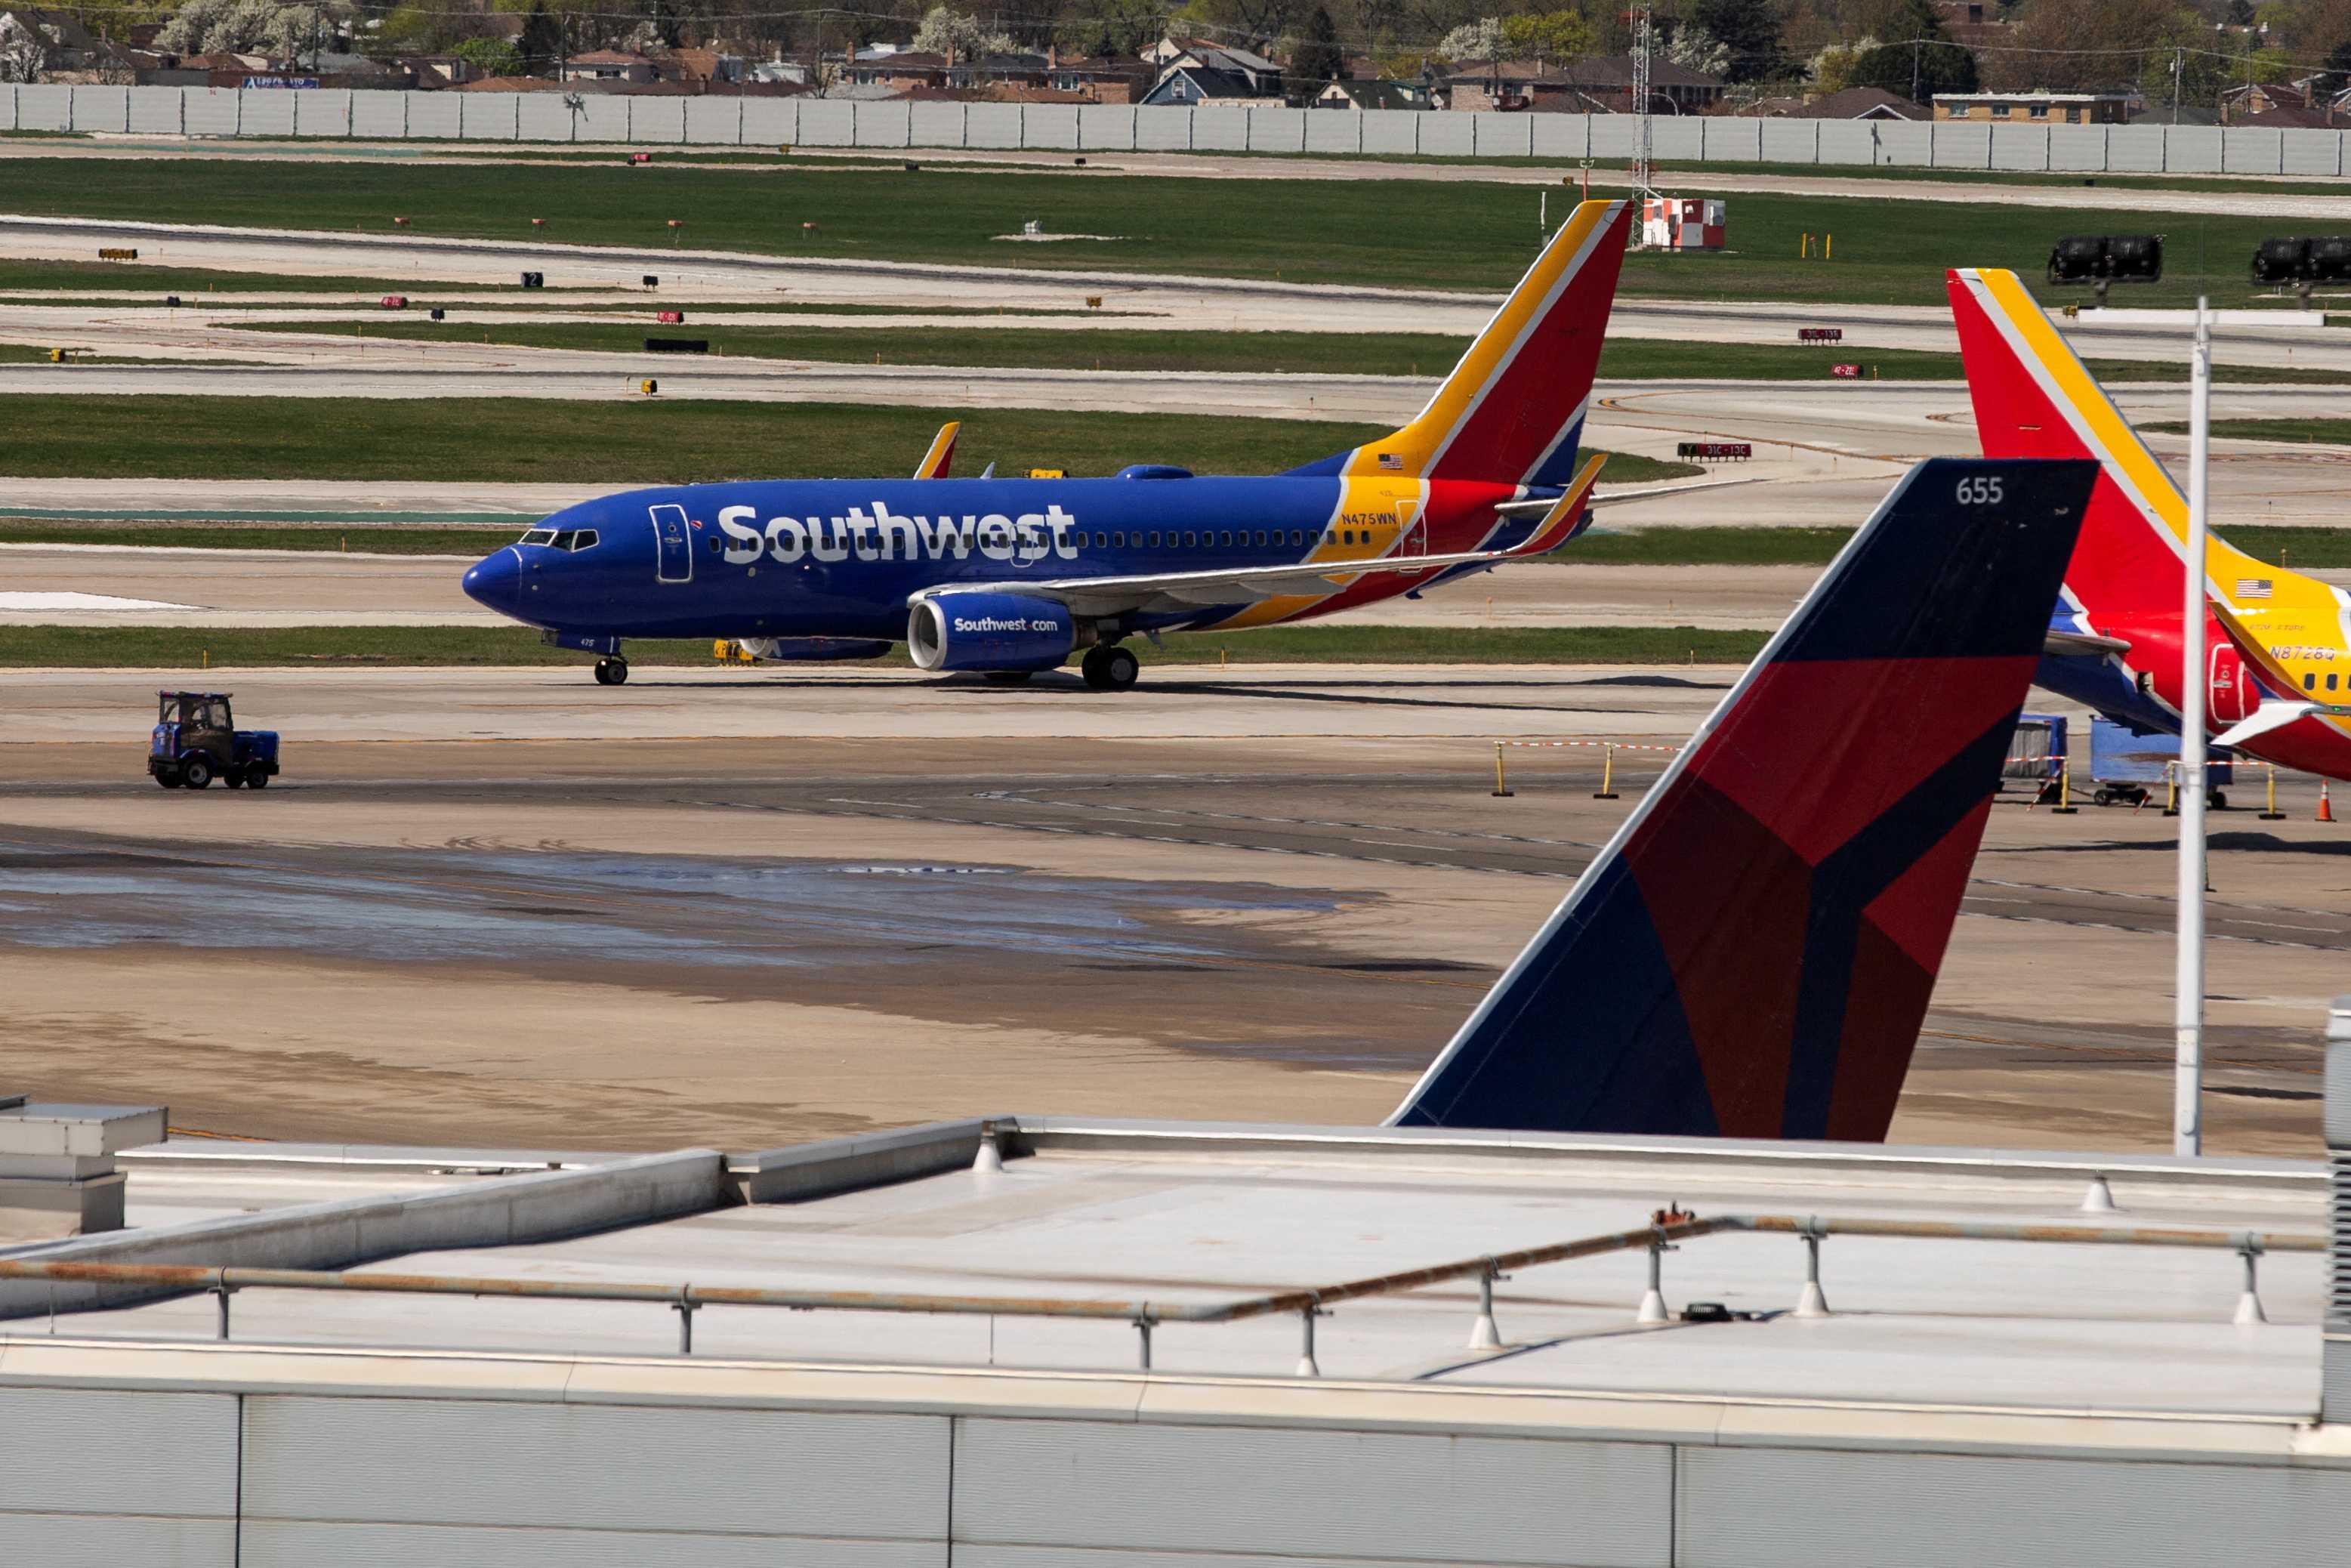 Southwest Airlines planes sit idle on the tarmac, at Chicago Midway International Airport in Chicago, Illinois, US April 18. Photo: Reuters